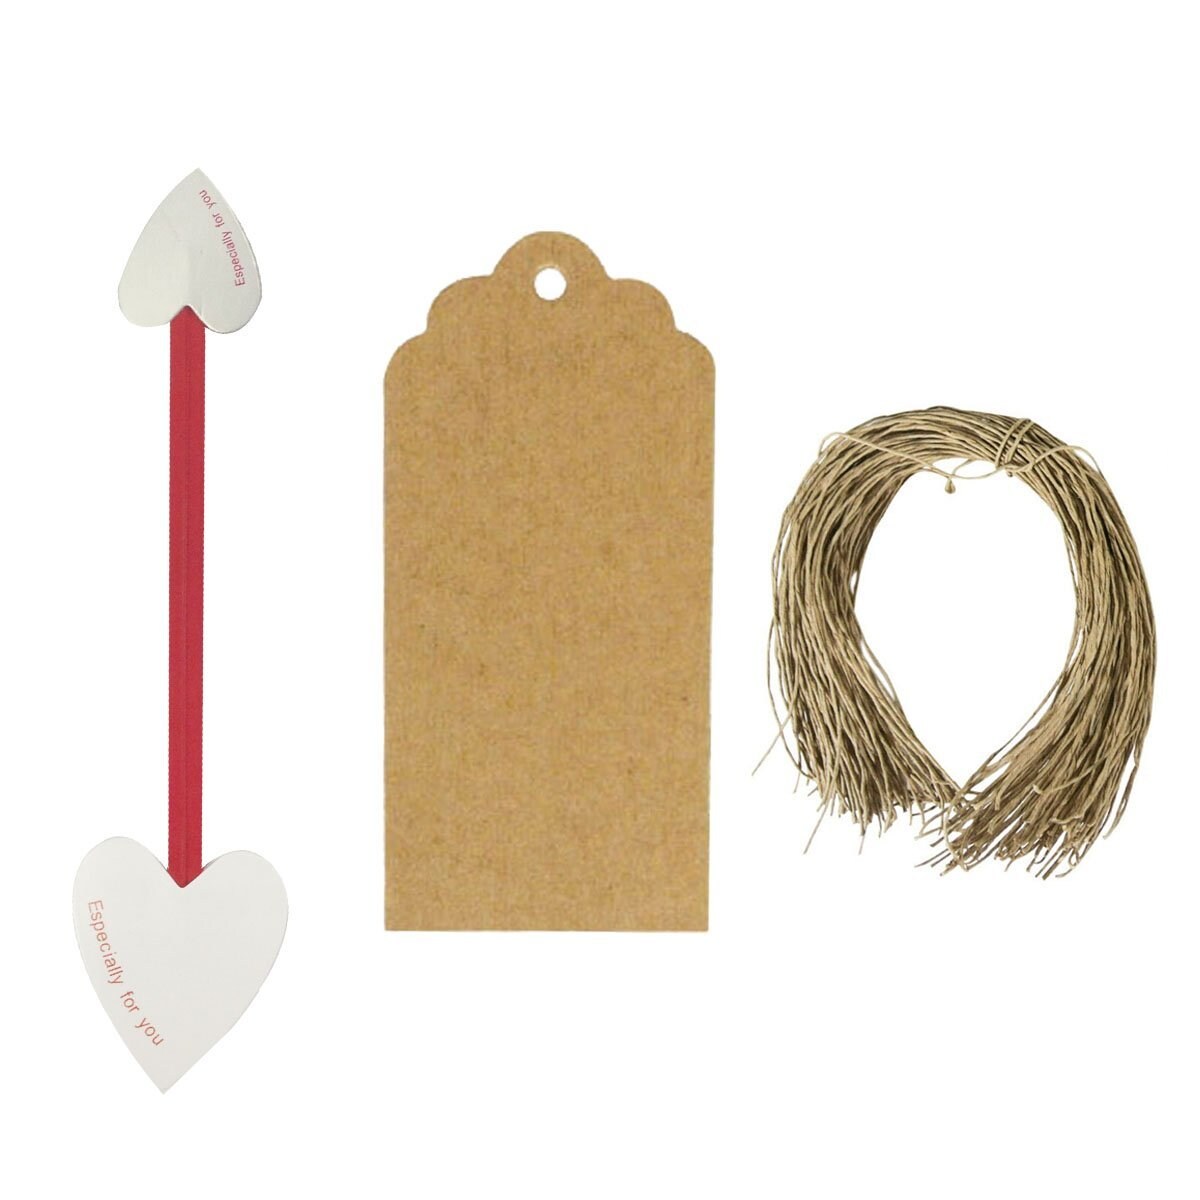 Wrapables Set of 50 Heart Twist Ties with 20 Scalloped Gift Tags